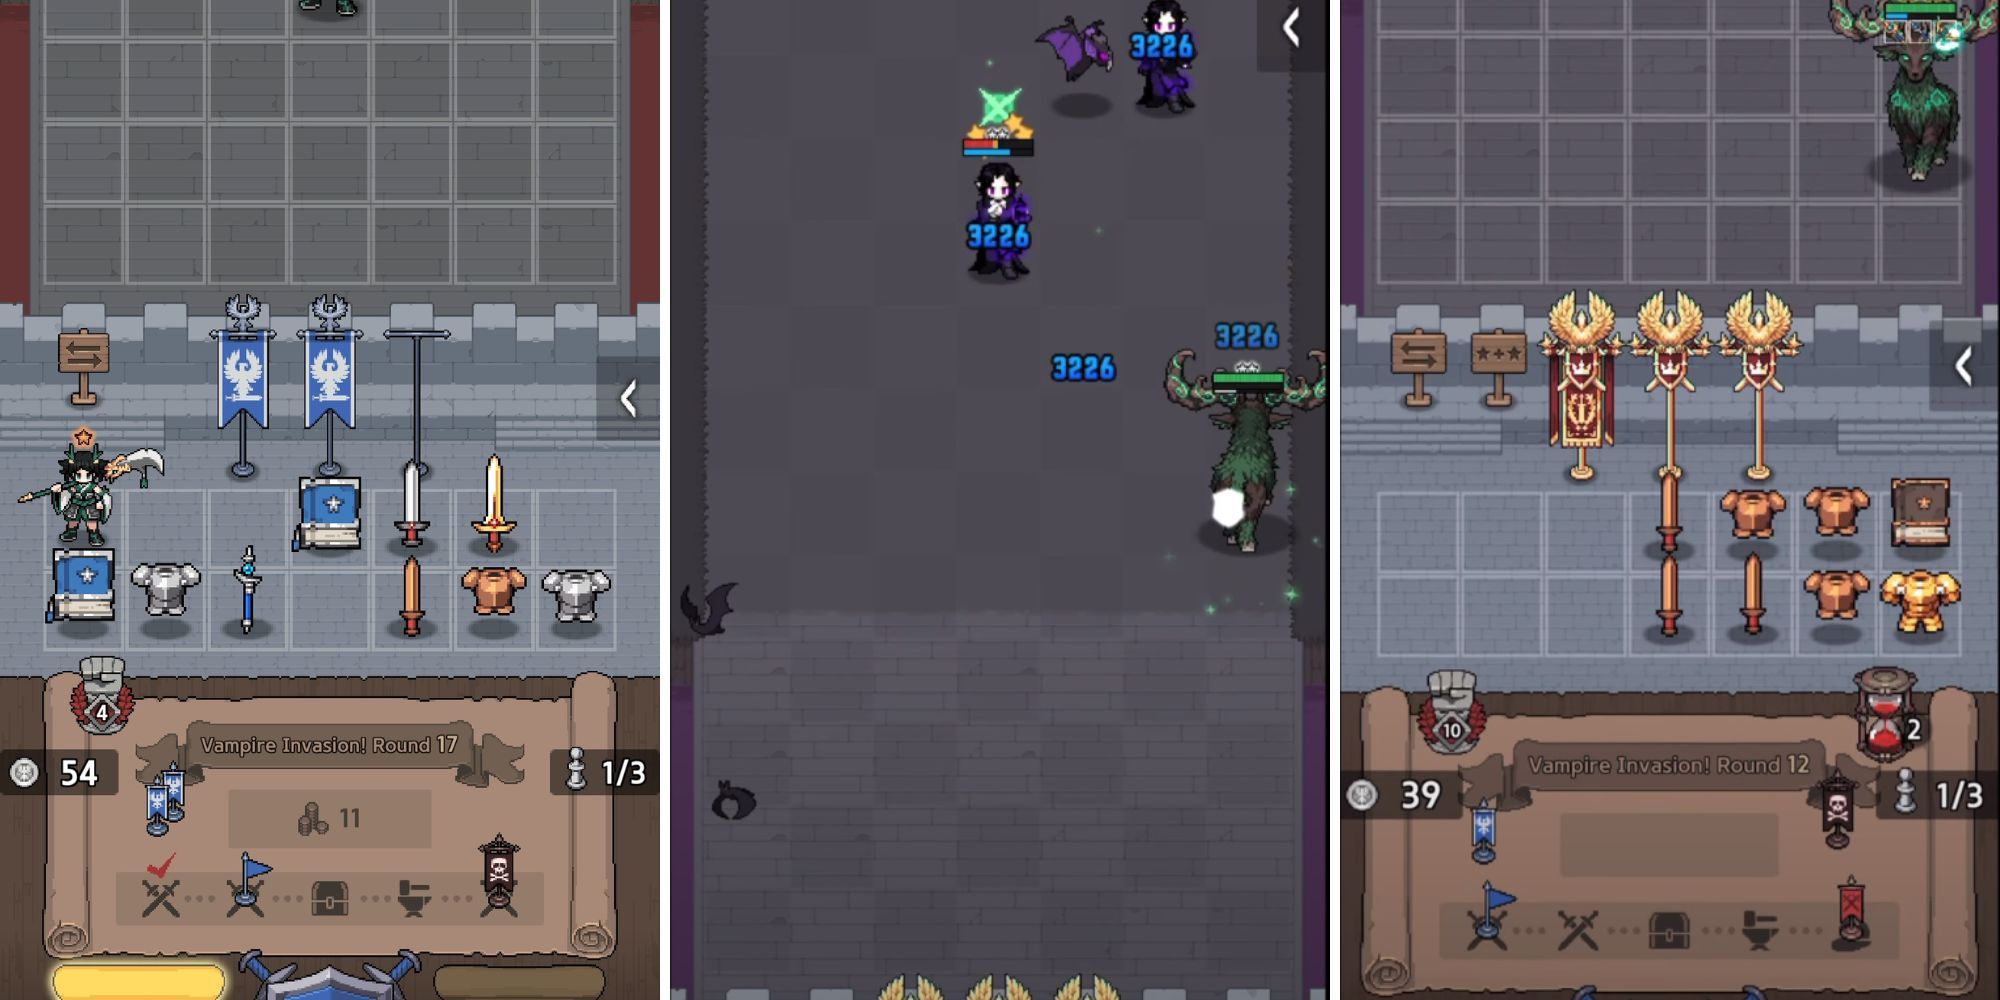 A split image showing blue, copper, steel, and other colored equipment, like spears and armor, and simple combat with blue damage numbers. 